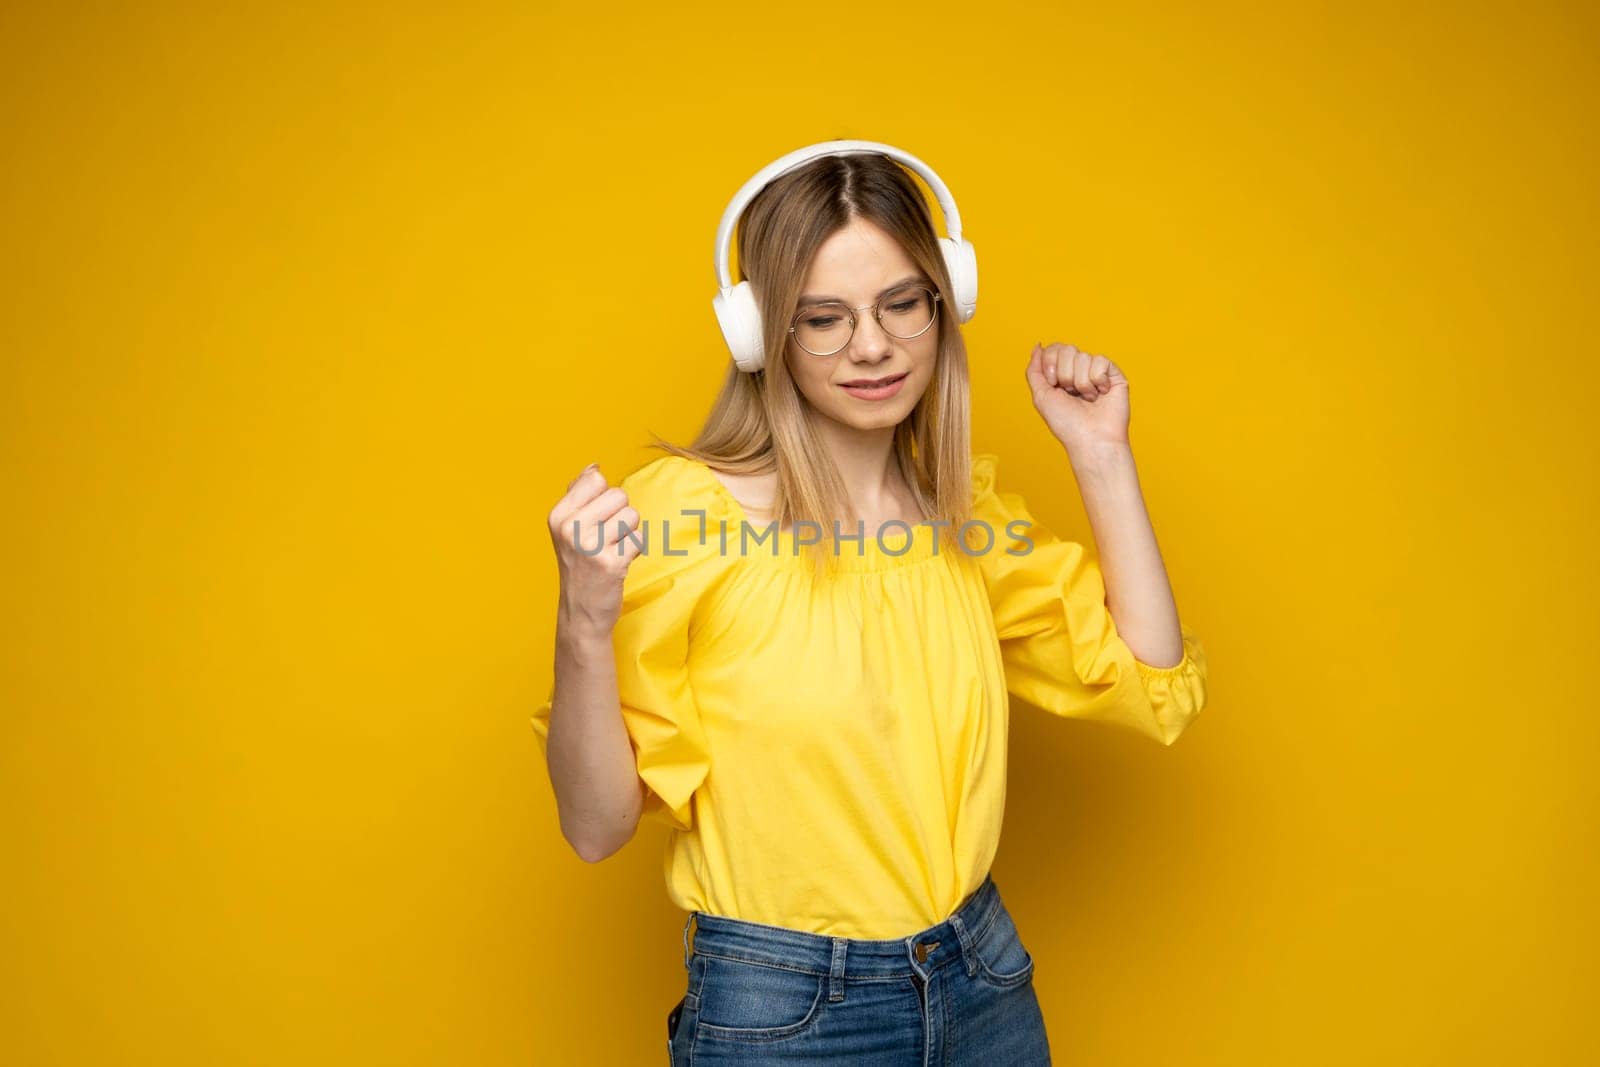 Lifestyle Concept. Portrait of beautiful woman in a glasses and yellow shirt joyful listening to music. Yellow studio background. Copy Space. by vovsht